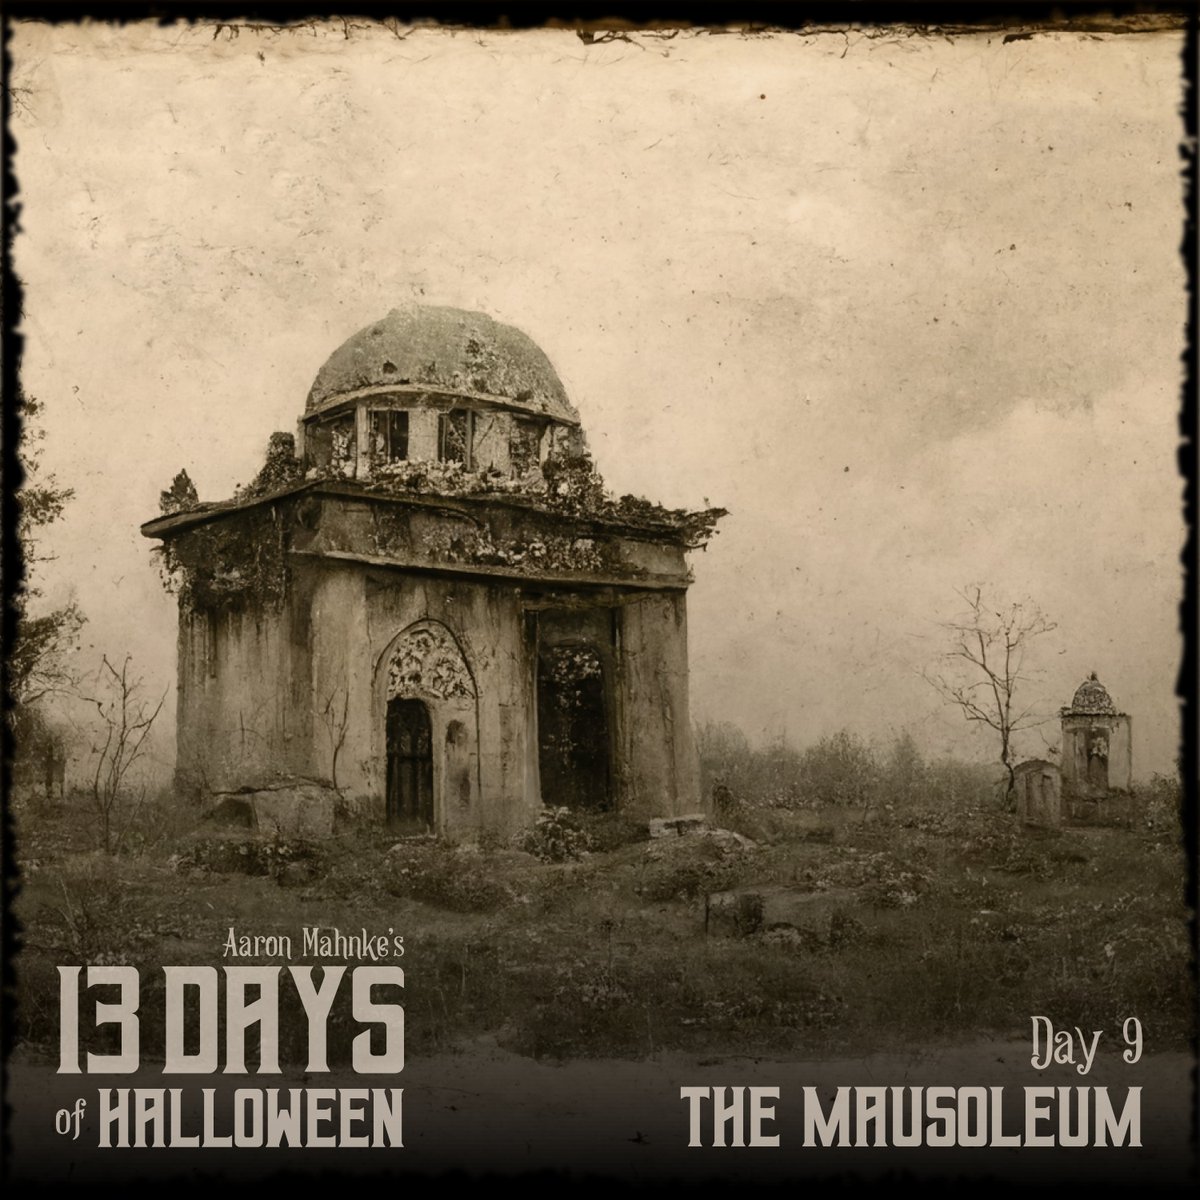 A monument. A hiding place. An unexpected guest. Day 9 of our 13 Days of Halloween is available on the @iheart radio app.